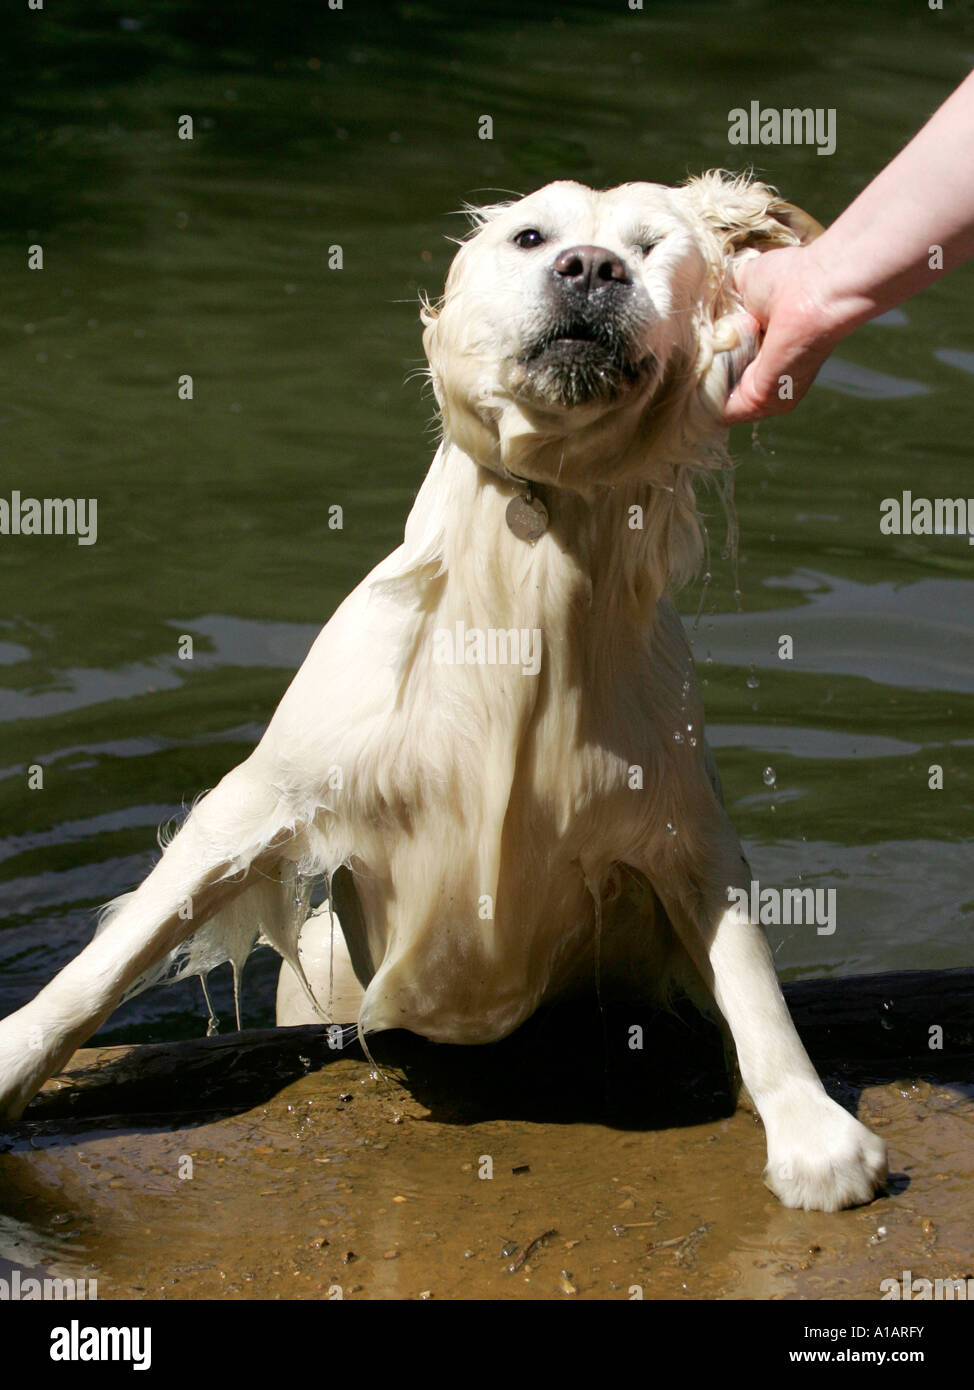 A dog being rescued from the water Stock Photo